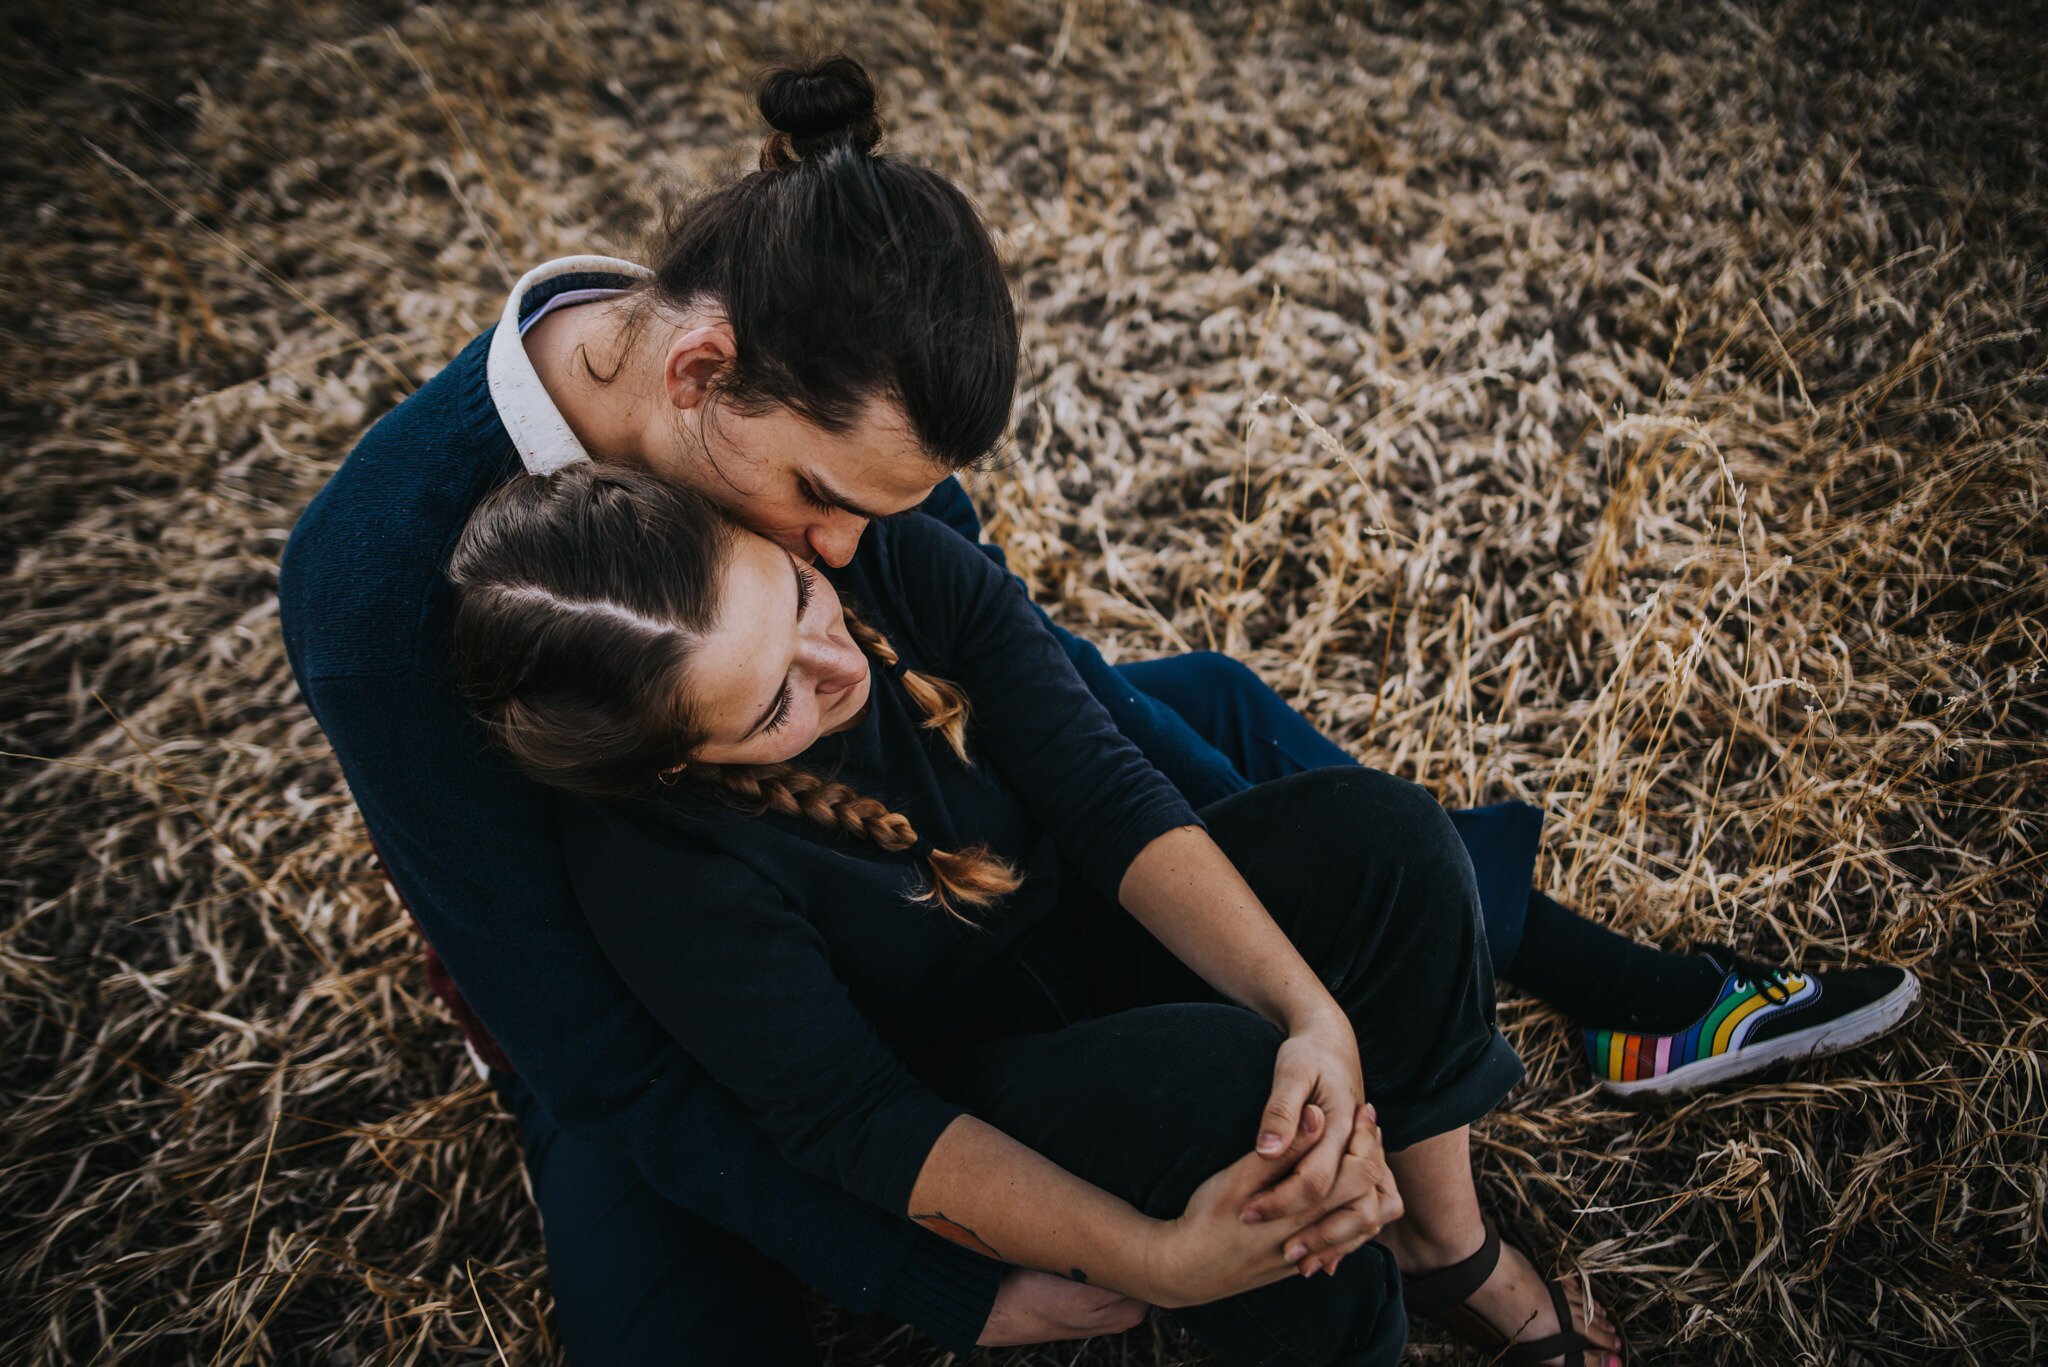 Yulia+and+Logan+Couples+Session+Colorado+Springs+Colorado+Sunset+Cheyenne+Canyon+Husband+Wife+Wild+Prairie+Photography-19-2020.jpeg